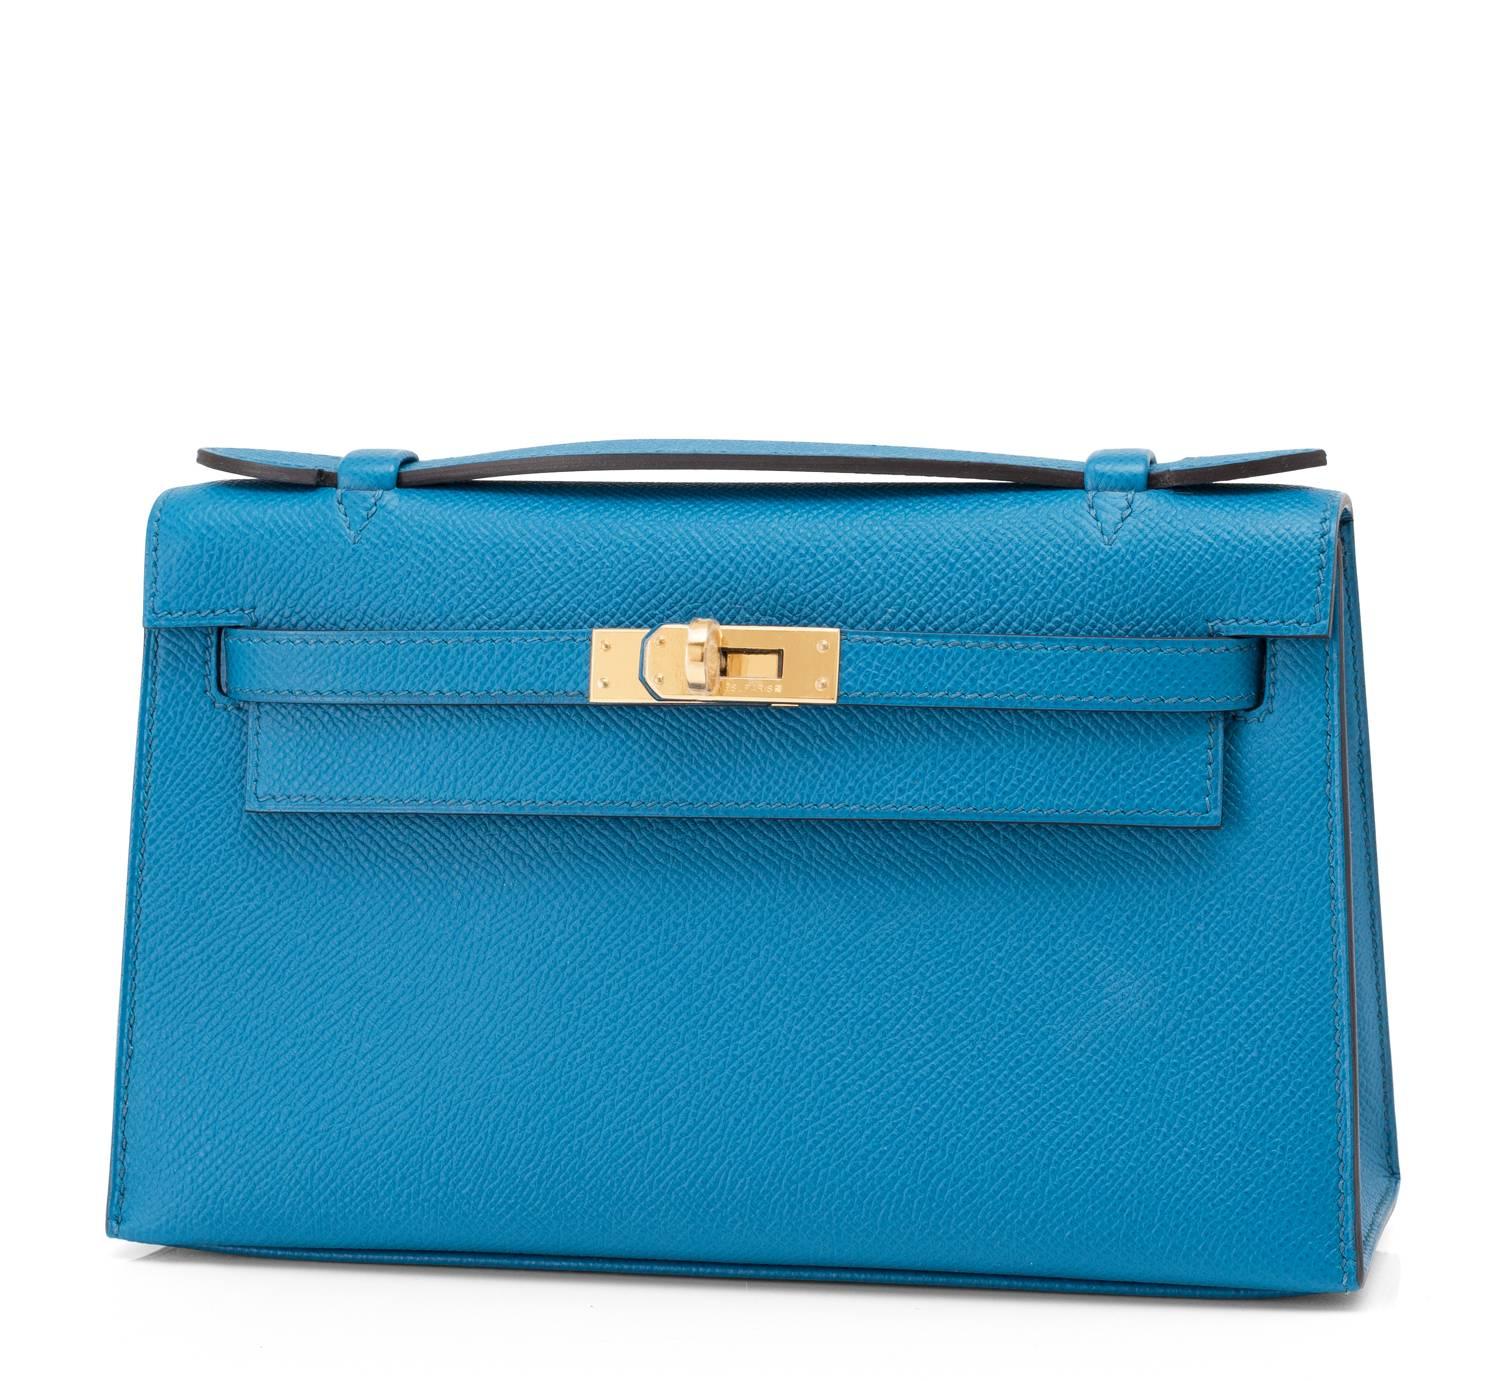 Hermes Blue Izmir Gold Kelly Pochette Epsom GHW Clutch Cut Bag 
Brand New in Box. Store fresh. Pristine condition (with plastic on hardware)
Perfect gift! Coming in full set with Hermes sleeper, box and ribbon
Blue Izmir set against gold hardware is